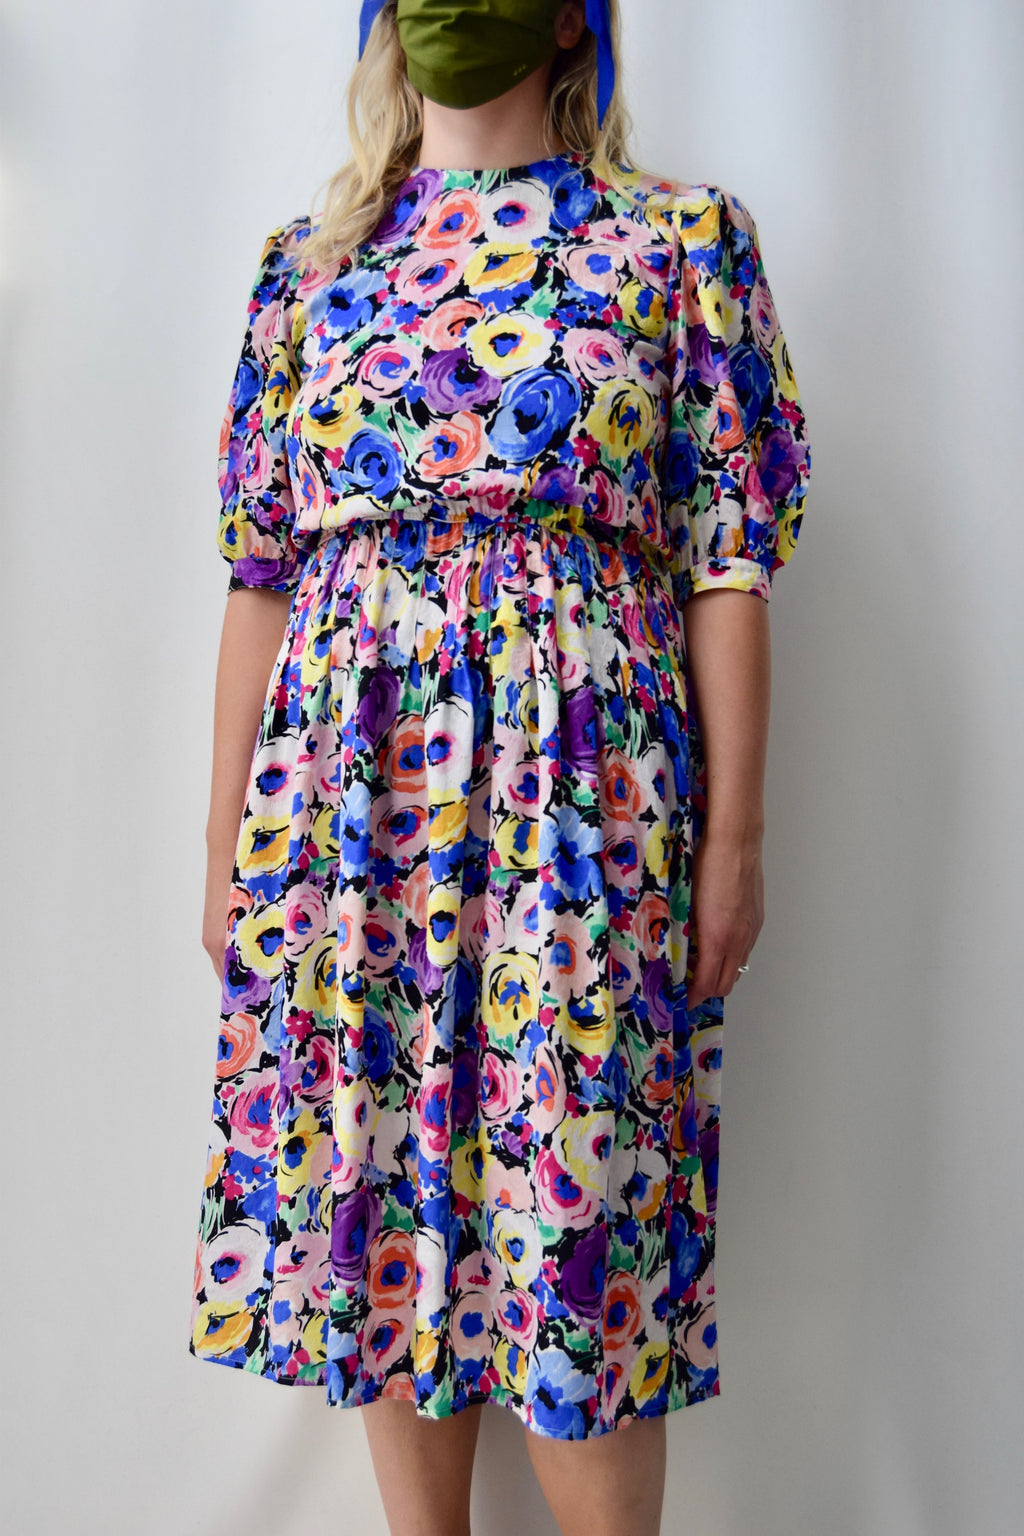 80's Adrianna Papell Vibrant Silk Floral Dress